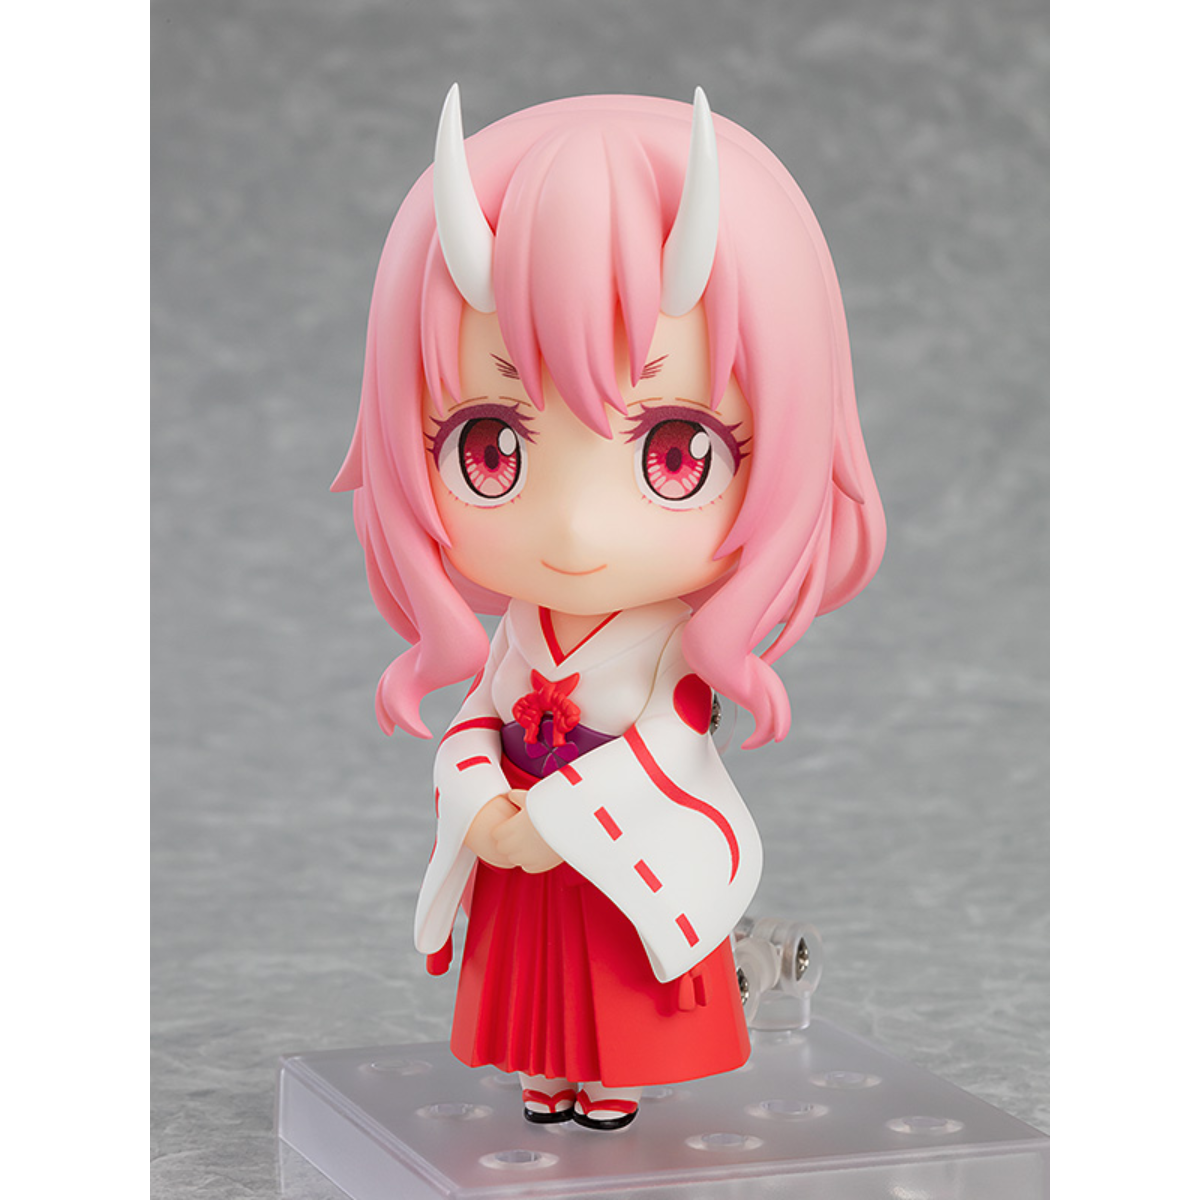 That Time I Got Reincarnated As A Slime Nendoroid [1978] "Shuna"-Good Smile Company-Ace Cards & Collectibles